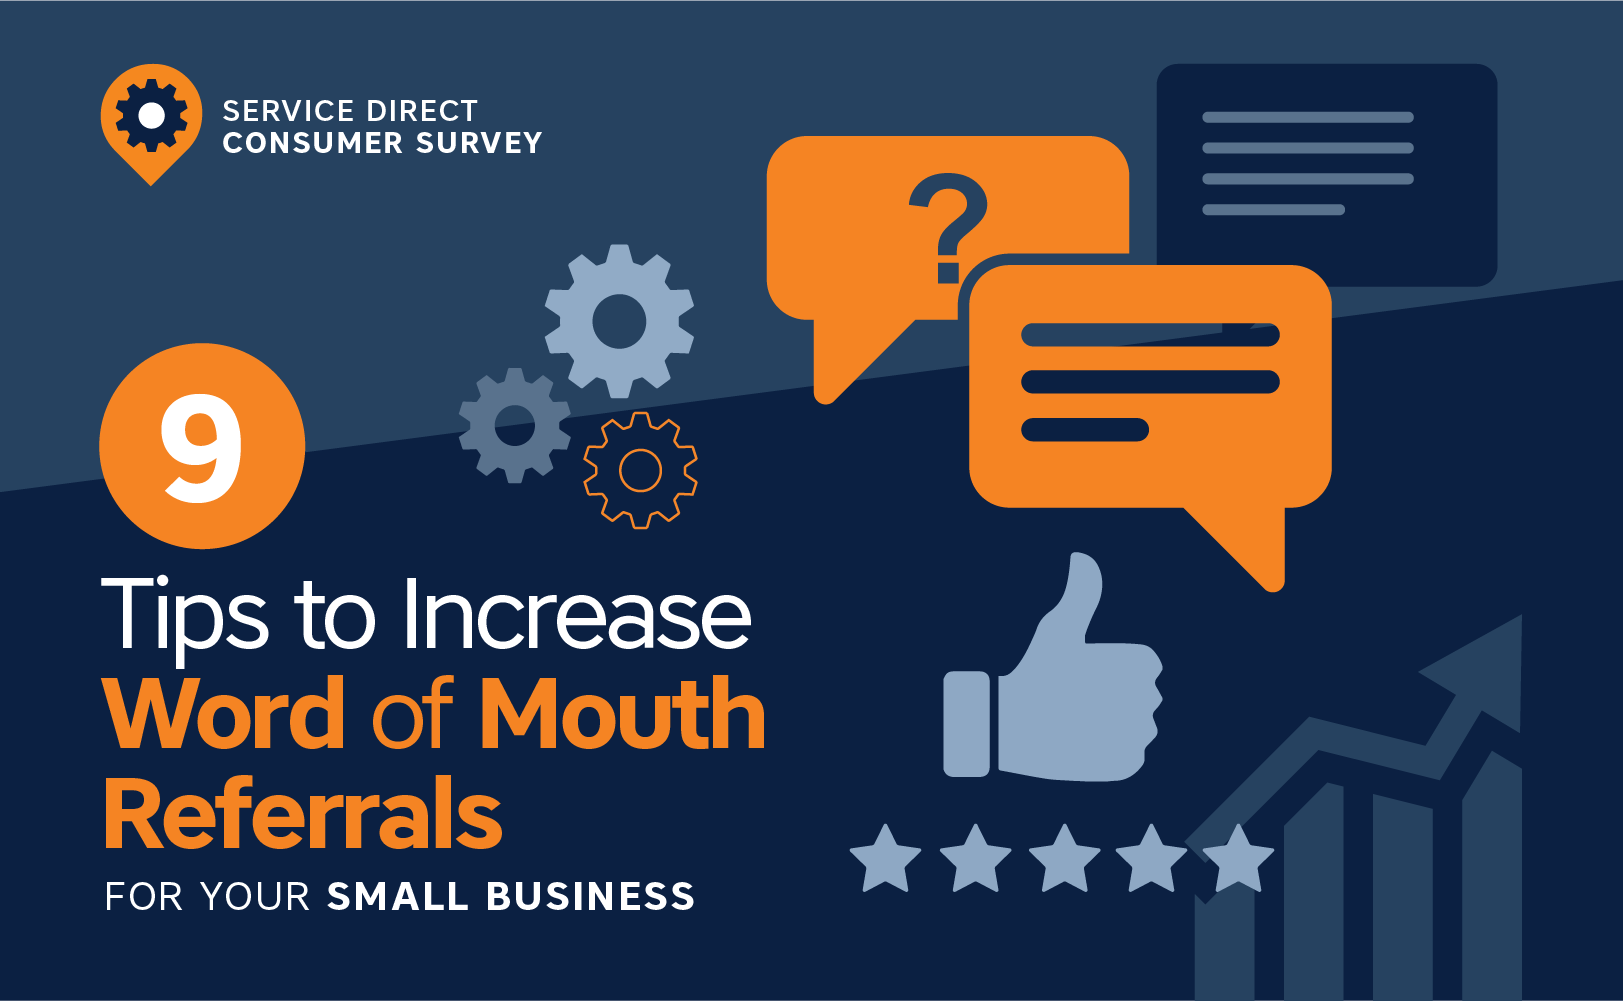 9 Tips to Increase Word of Mouth Referrals for Your Small Business in 2022